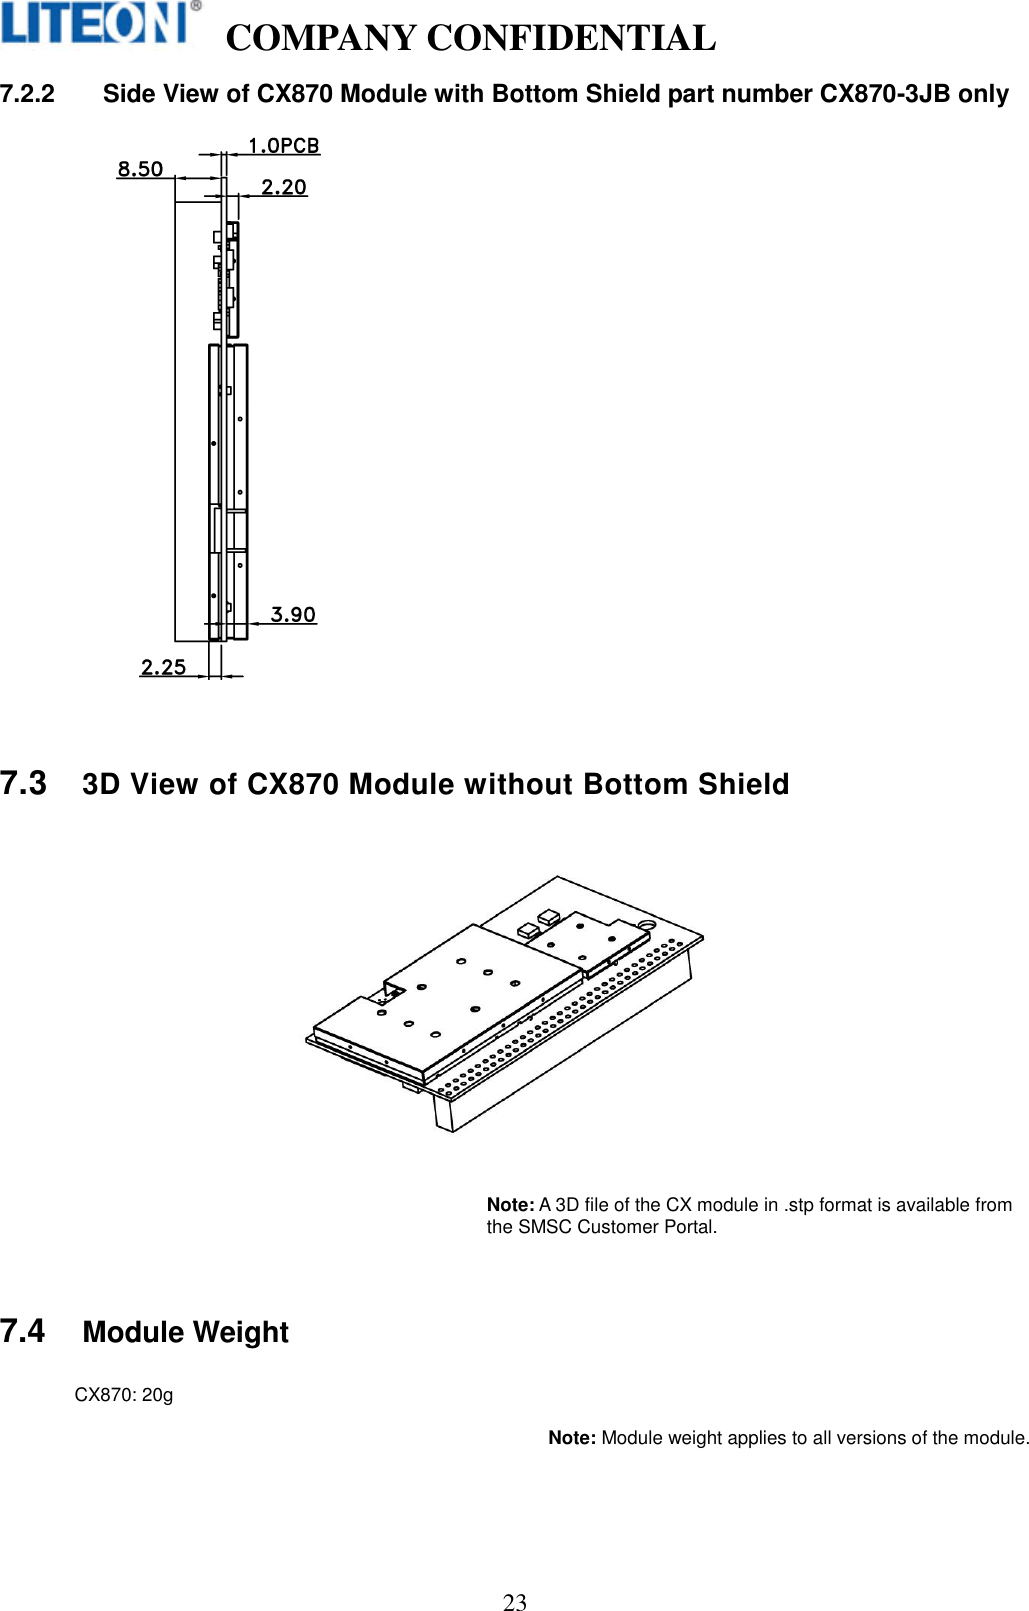   COMPANY CONFIDENTIAL    23 7.2.2  Side View of CX870 Module with Bottom Shield part number CX870-3JB only    7.3 3D View of CX870 Module without Bottom Shield      Note: A 3D file of the CX module in .stp format is available from the SMSC Customer Portal.   7.4 Module Weight  CX870: 20g  Note: Module weight applies to all versions of the module.   